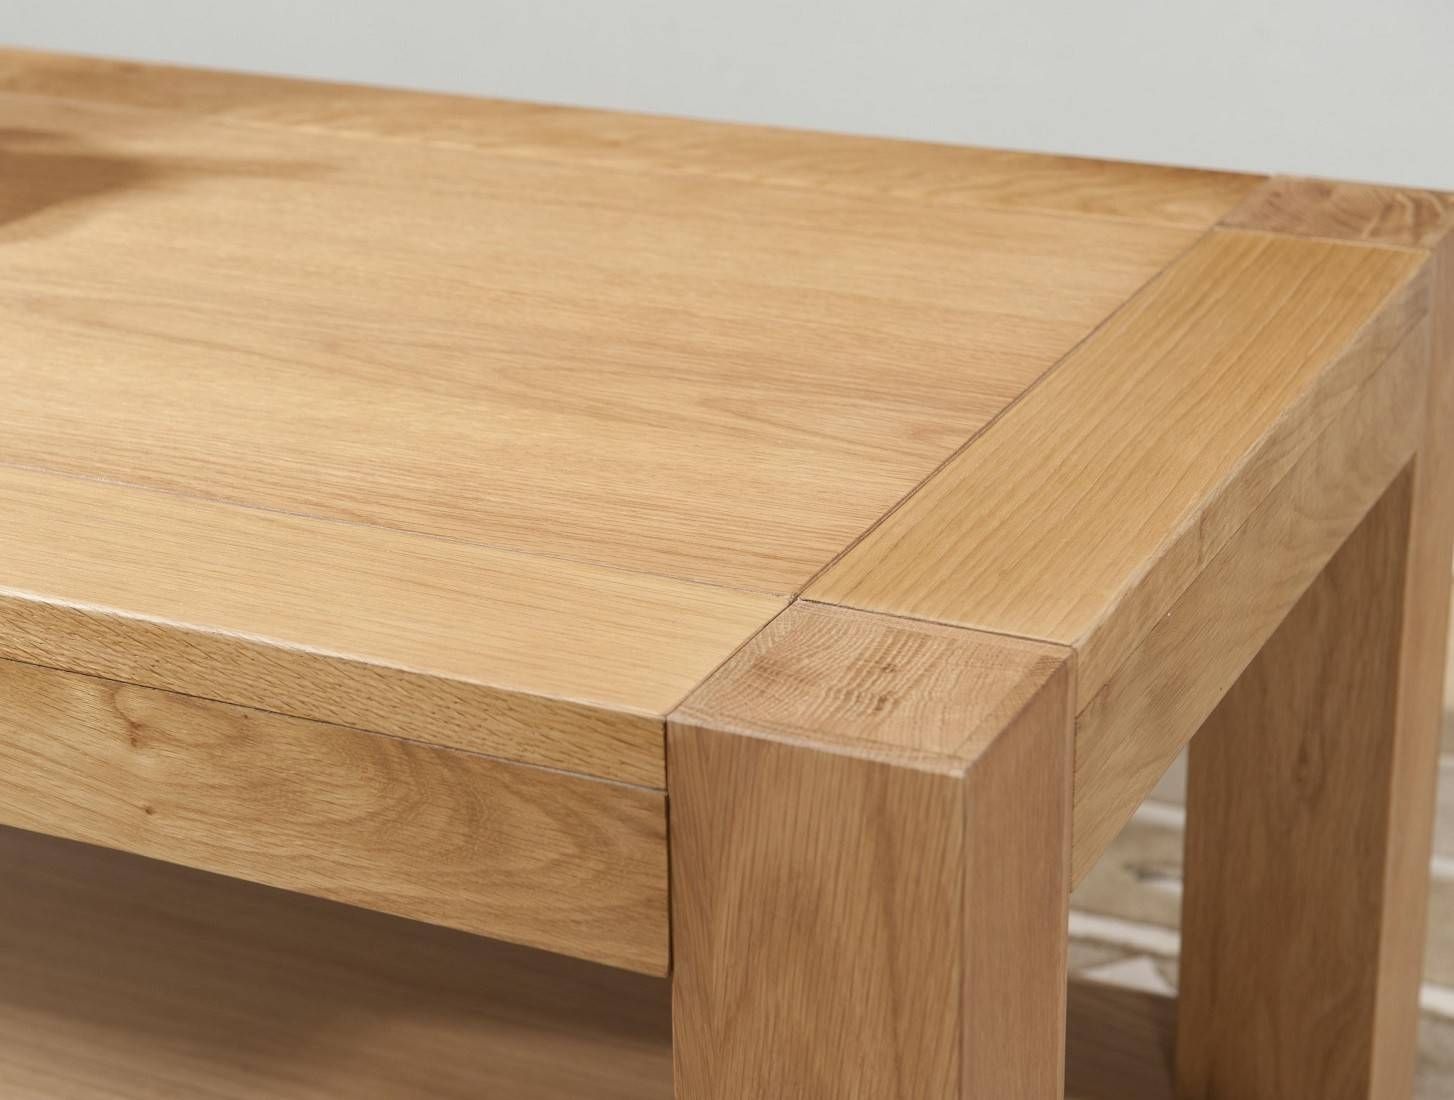 Aylesbury Contemporary Light Oak Coffee Table | Oak Furniture Uk With Regard To Contemporary Oak Coffee Table (View 10 of 15)